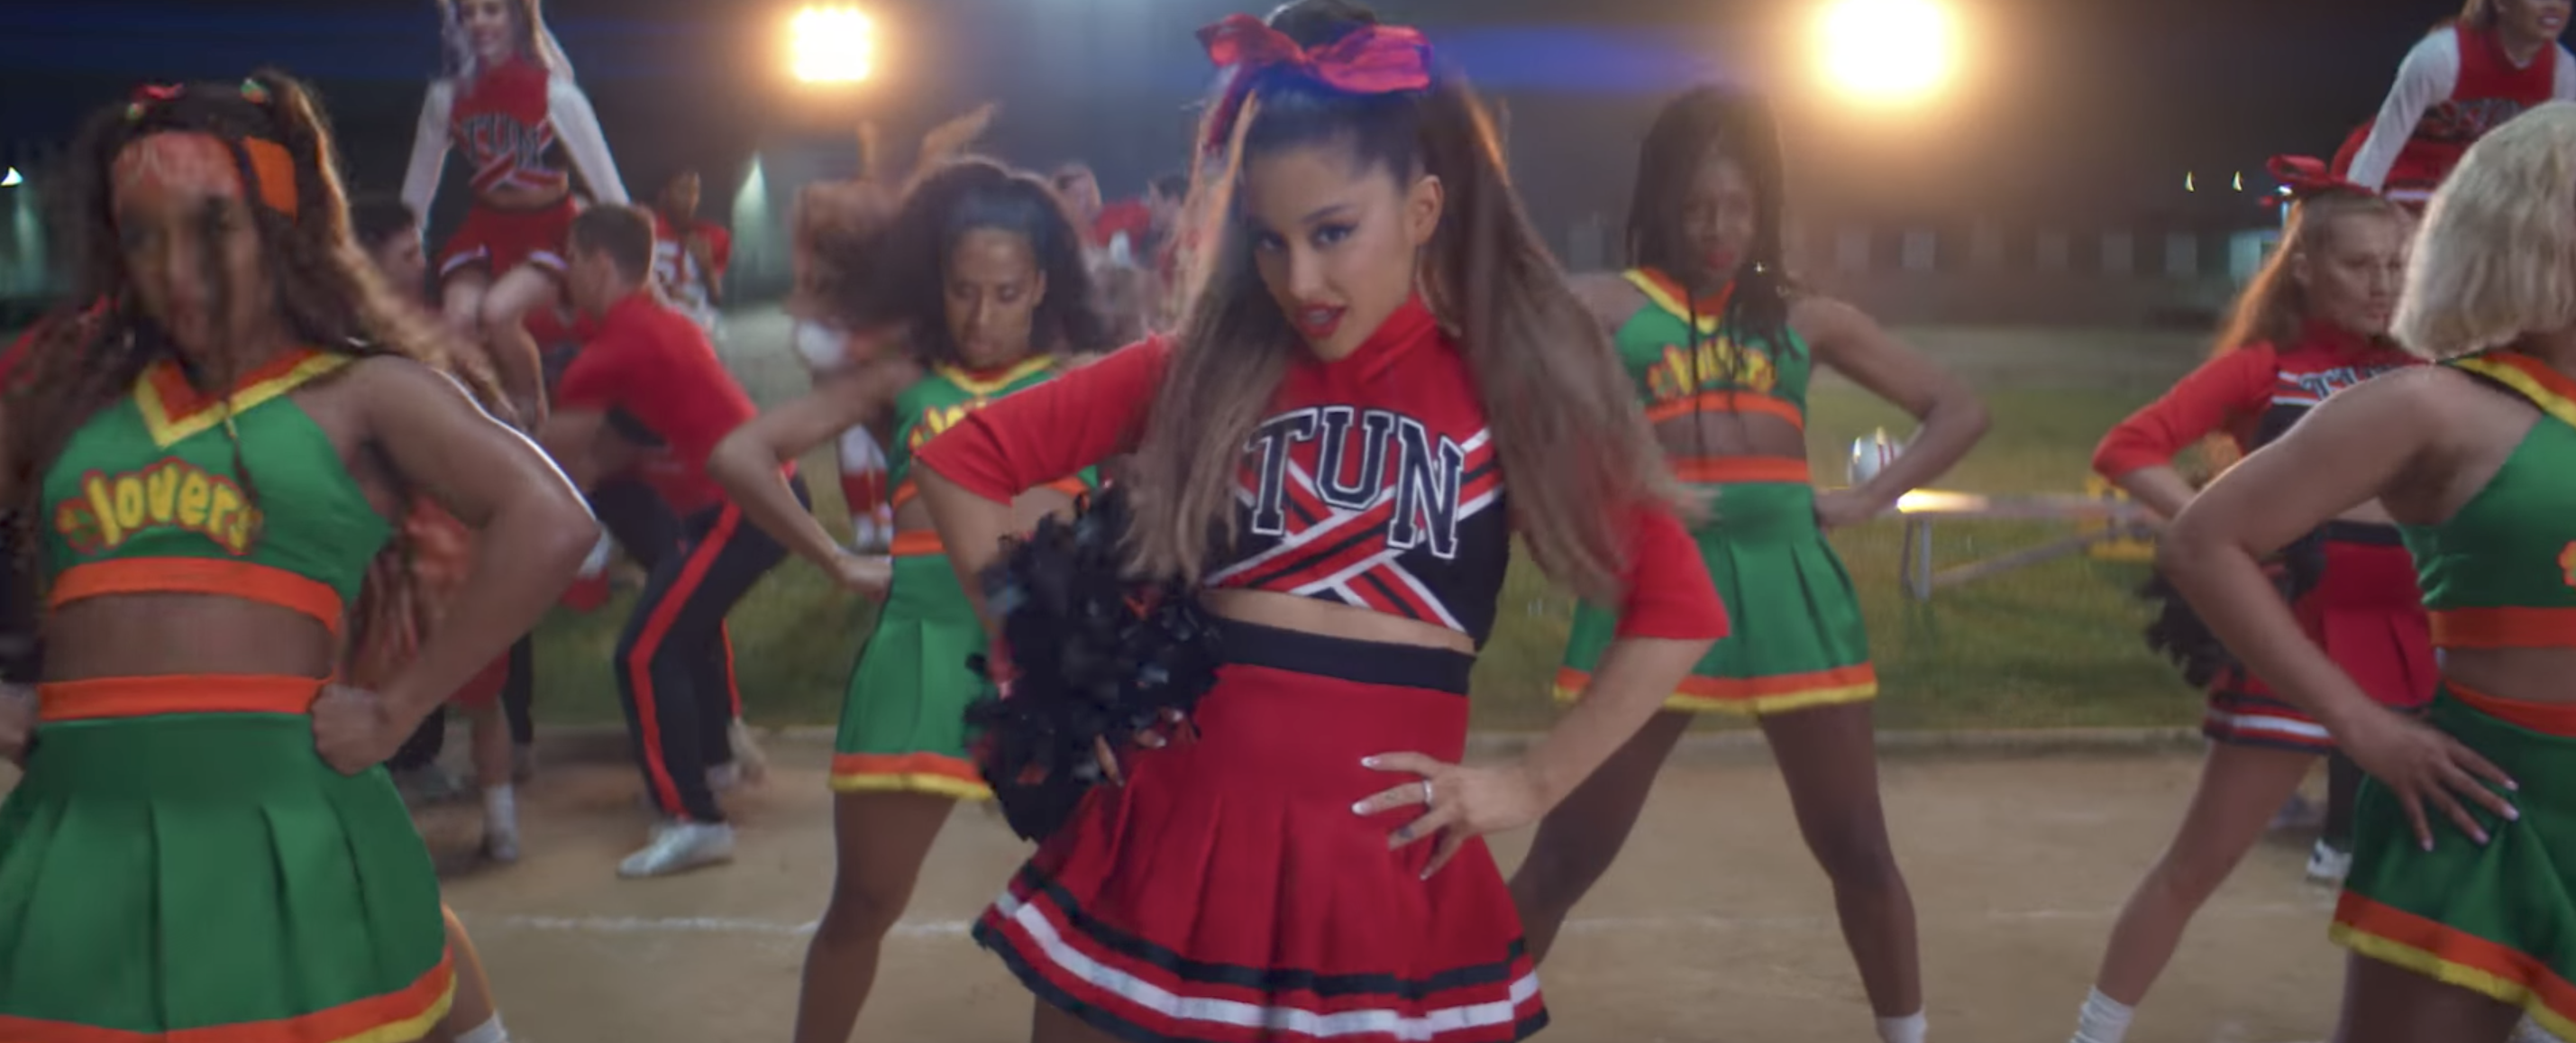 Ariana Grande's Thank U, Next Video: Shop Every Outfit